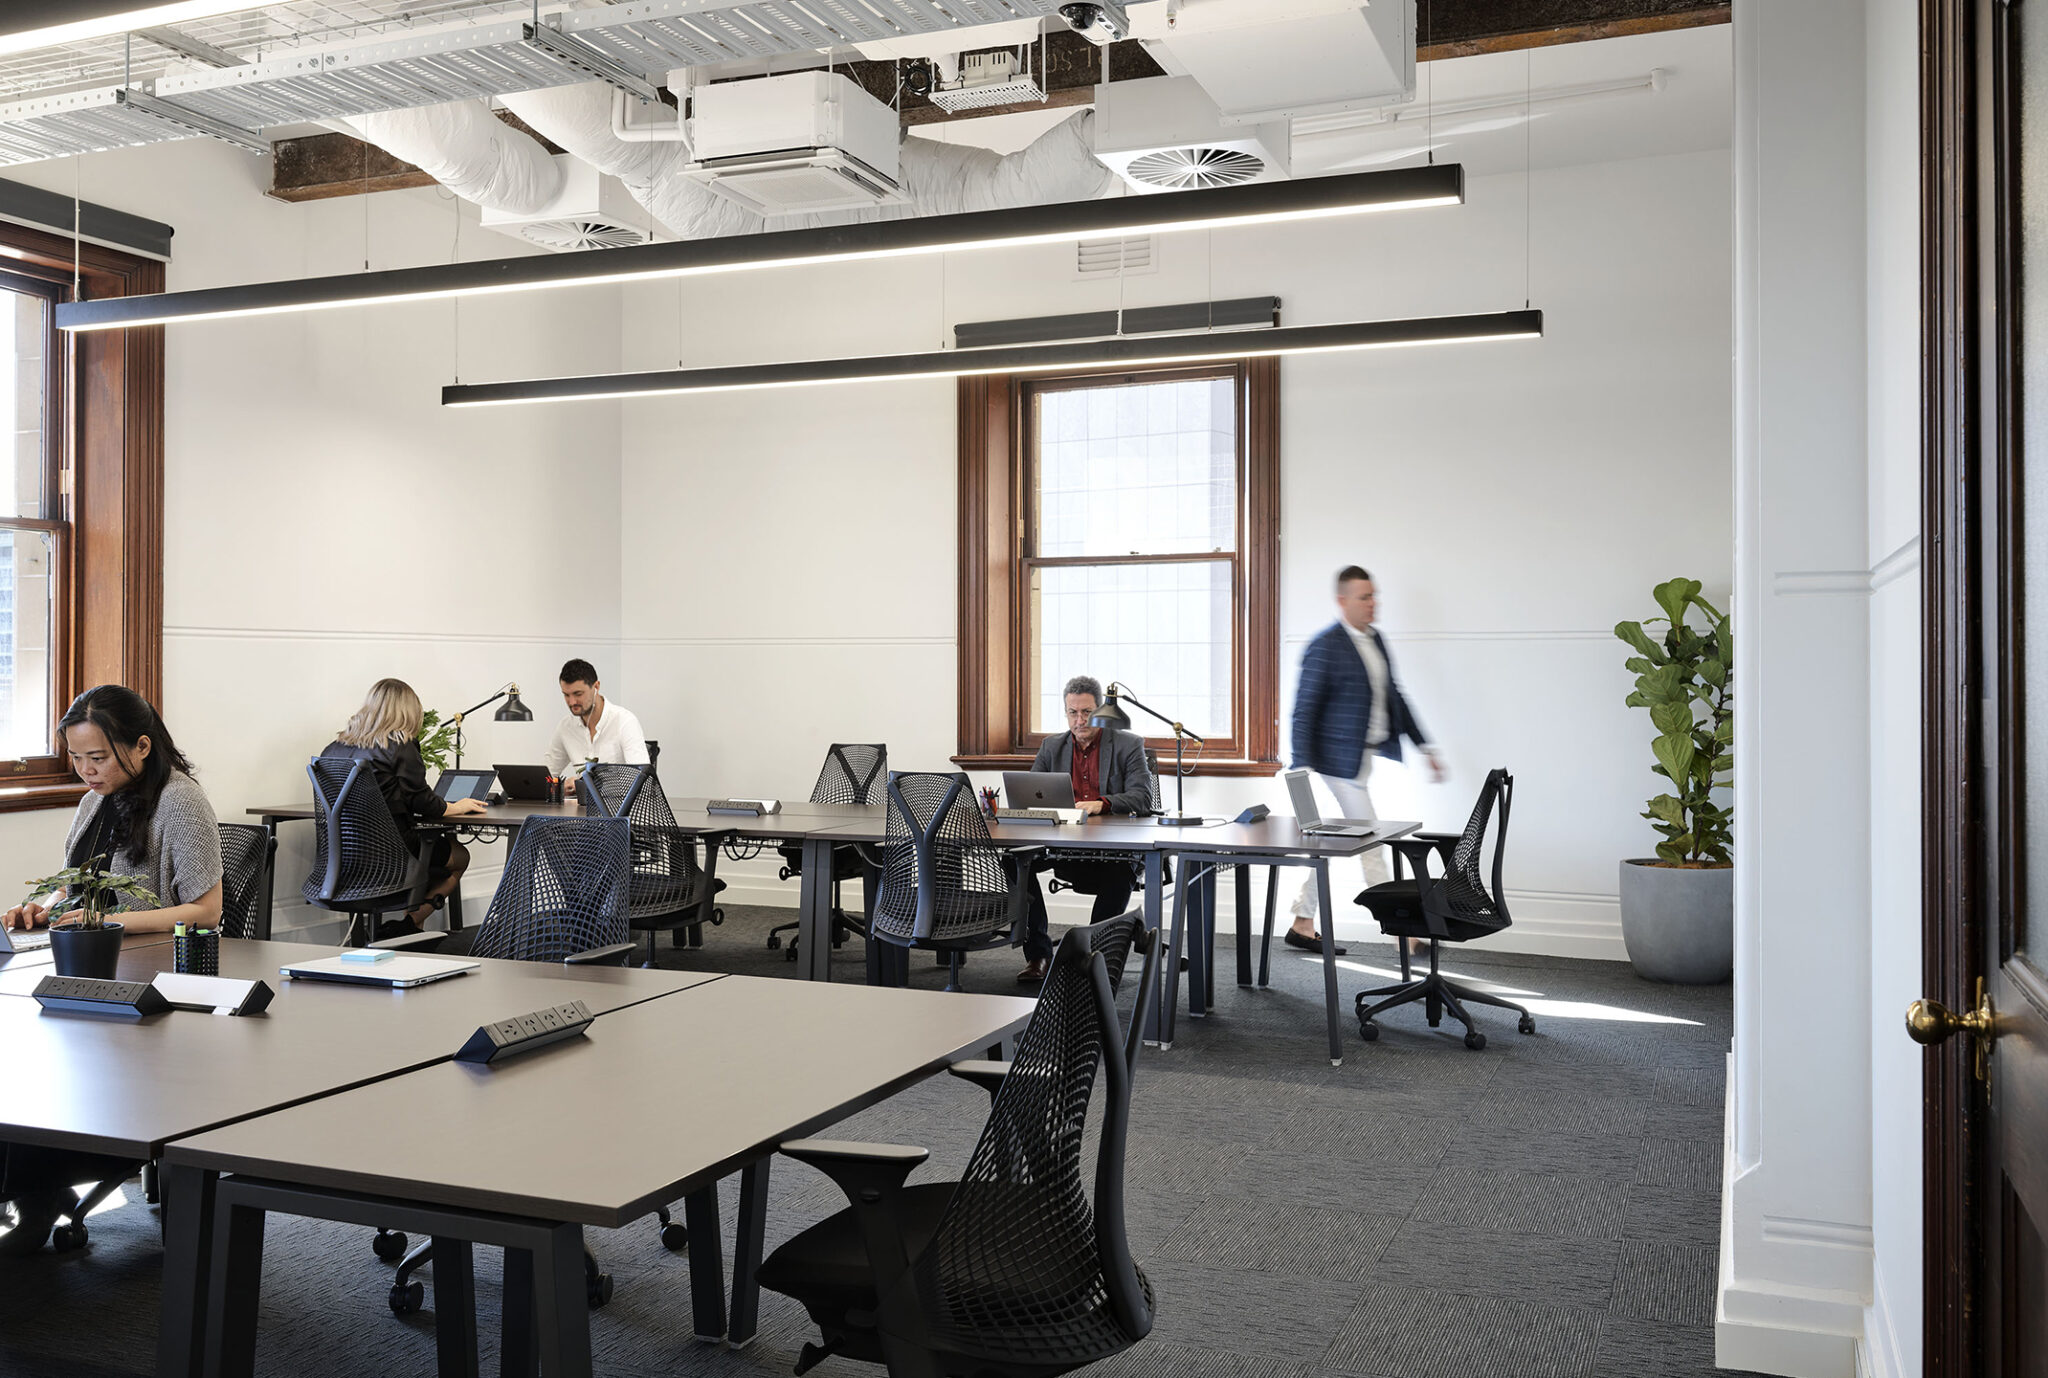  Serviced Office Space in Sydney Hub Australia provides fully-furnished serviced office spaces in Sydney for teams of 1 to 100, ready for your team to move in. Discover the flexible monthly terms of our premium serviced office spaces in our four Sydney locations.